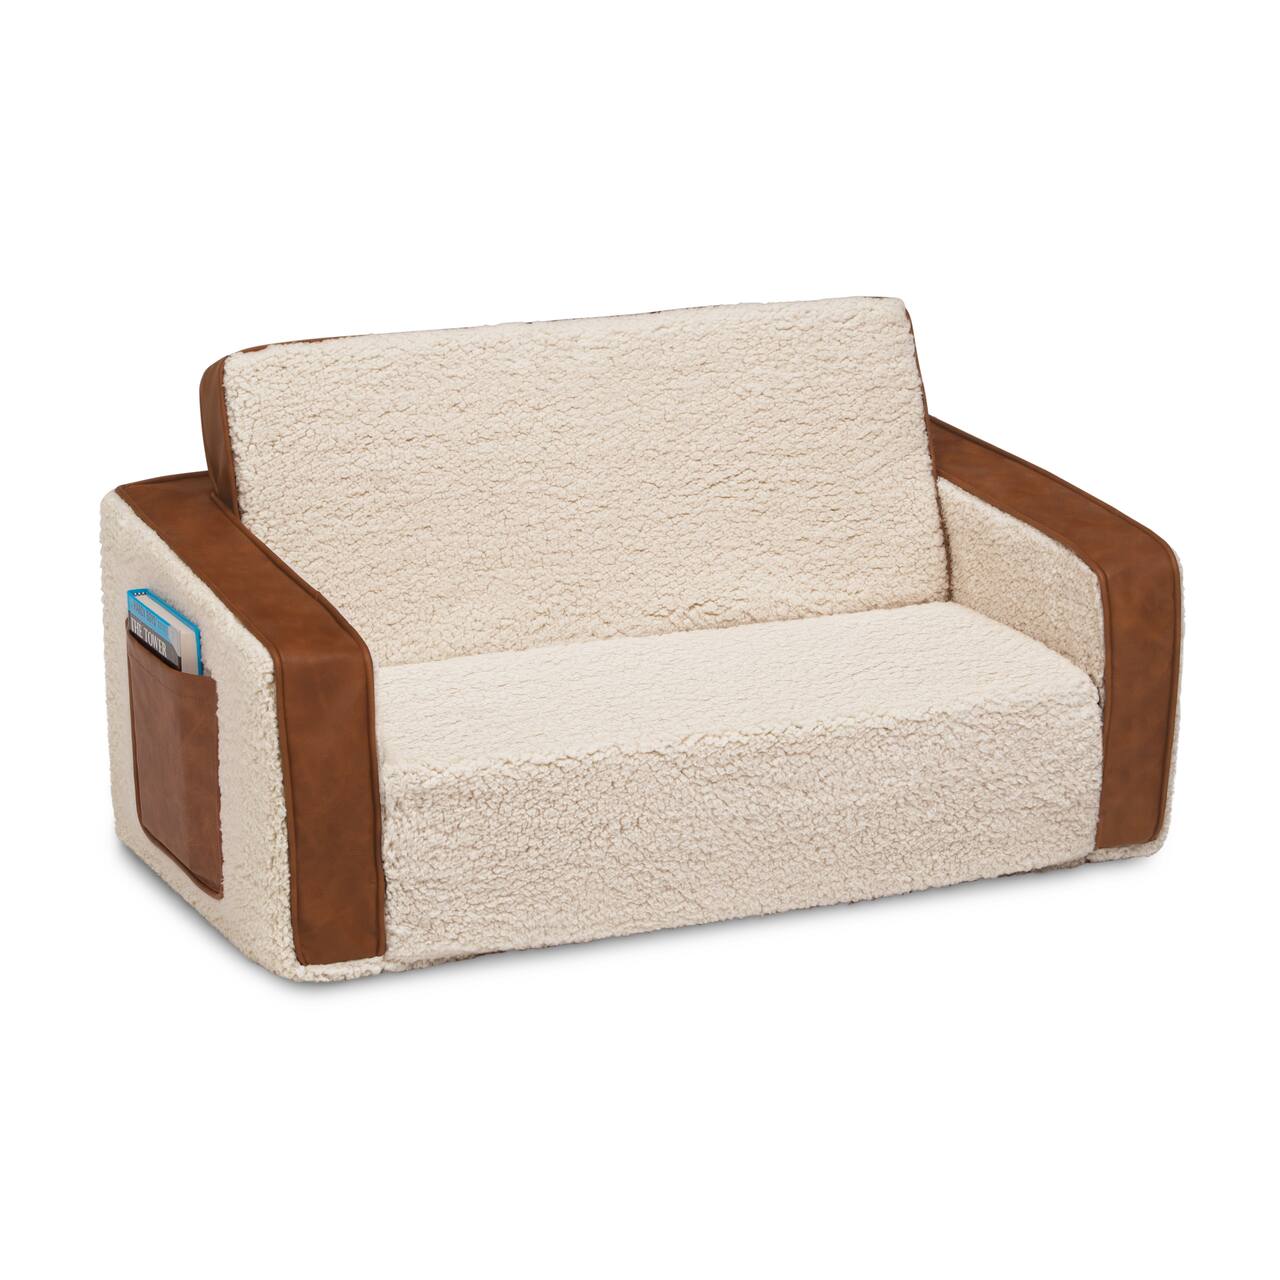  Sherpa Flip Out Sofa With Brown Leather